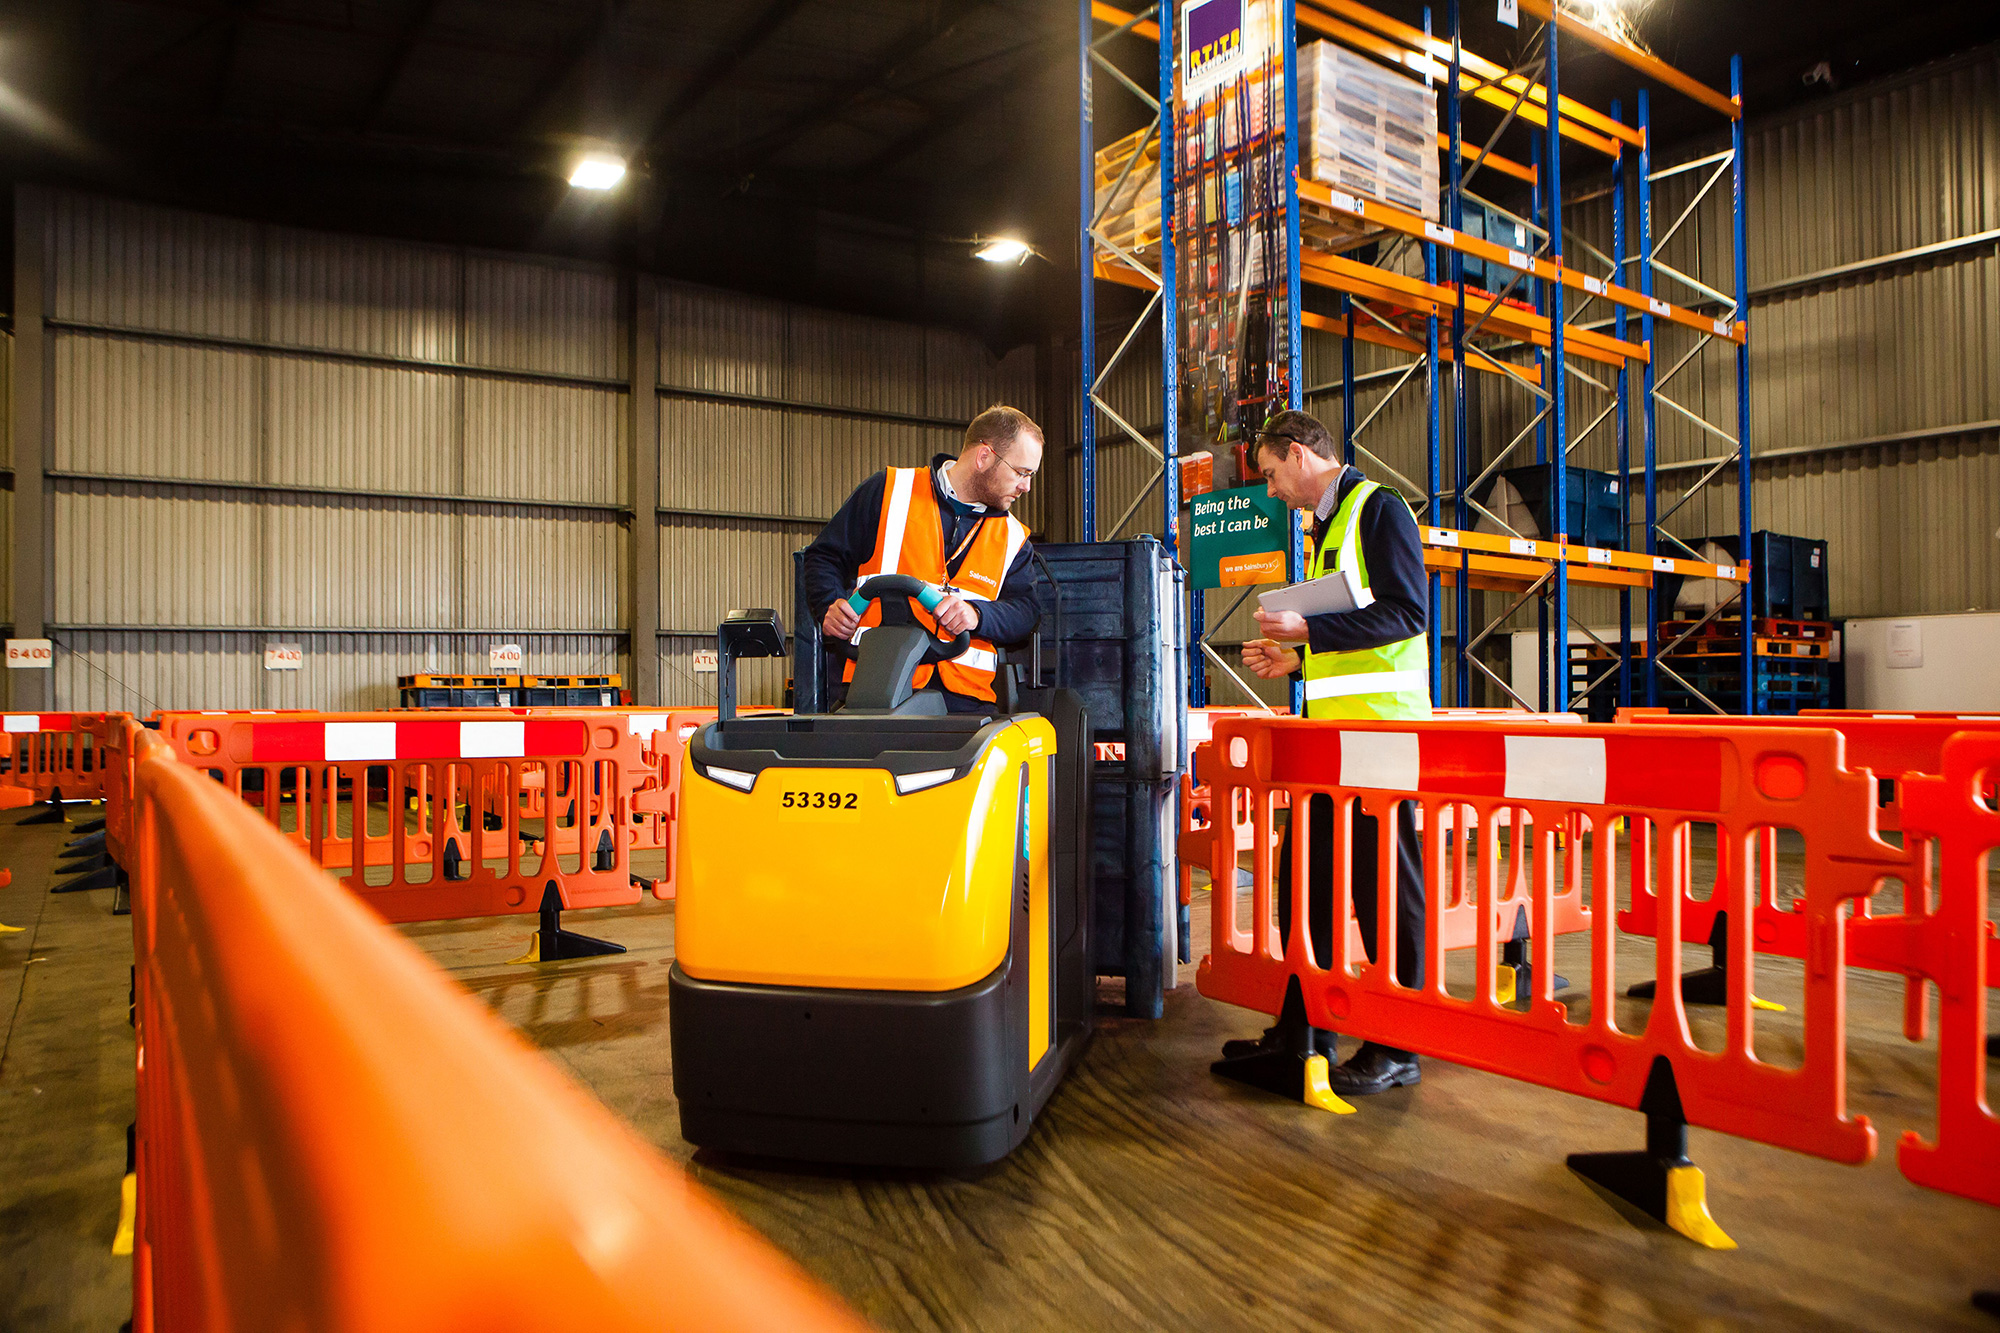 Firms potentially wasting 1000s GBP on lift truck training according to RTITB